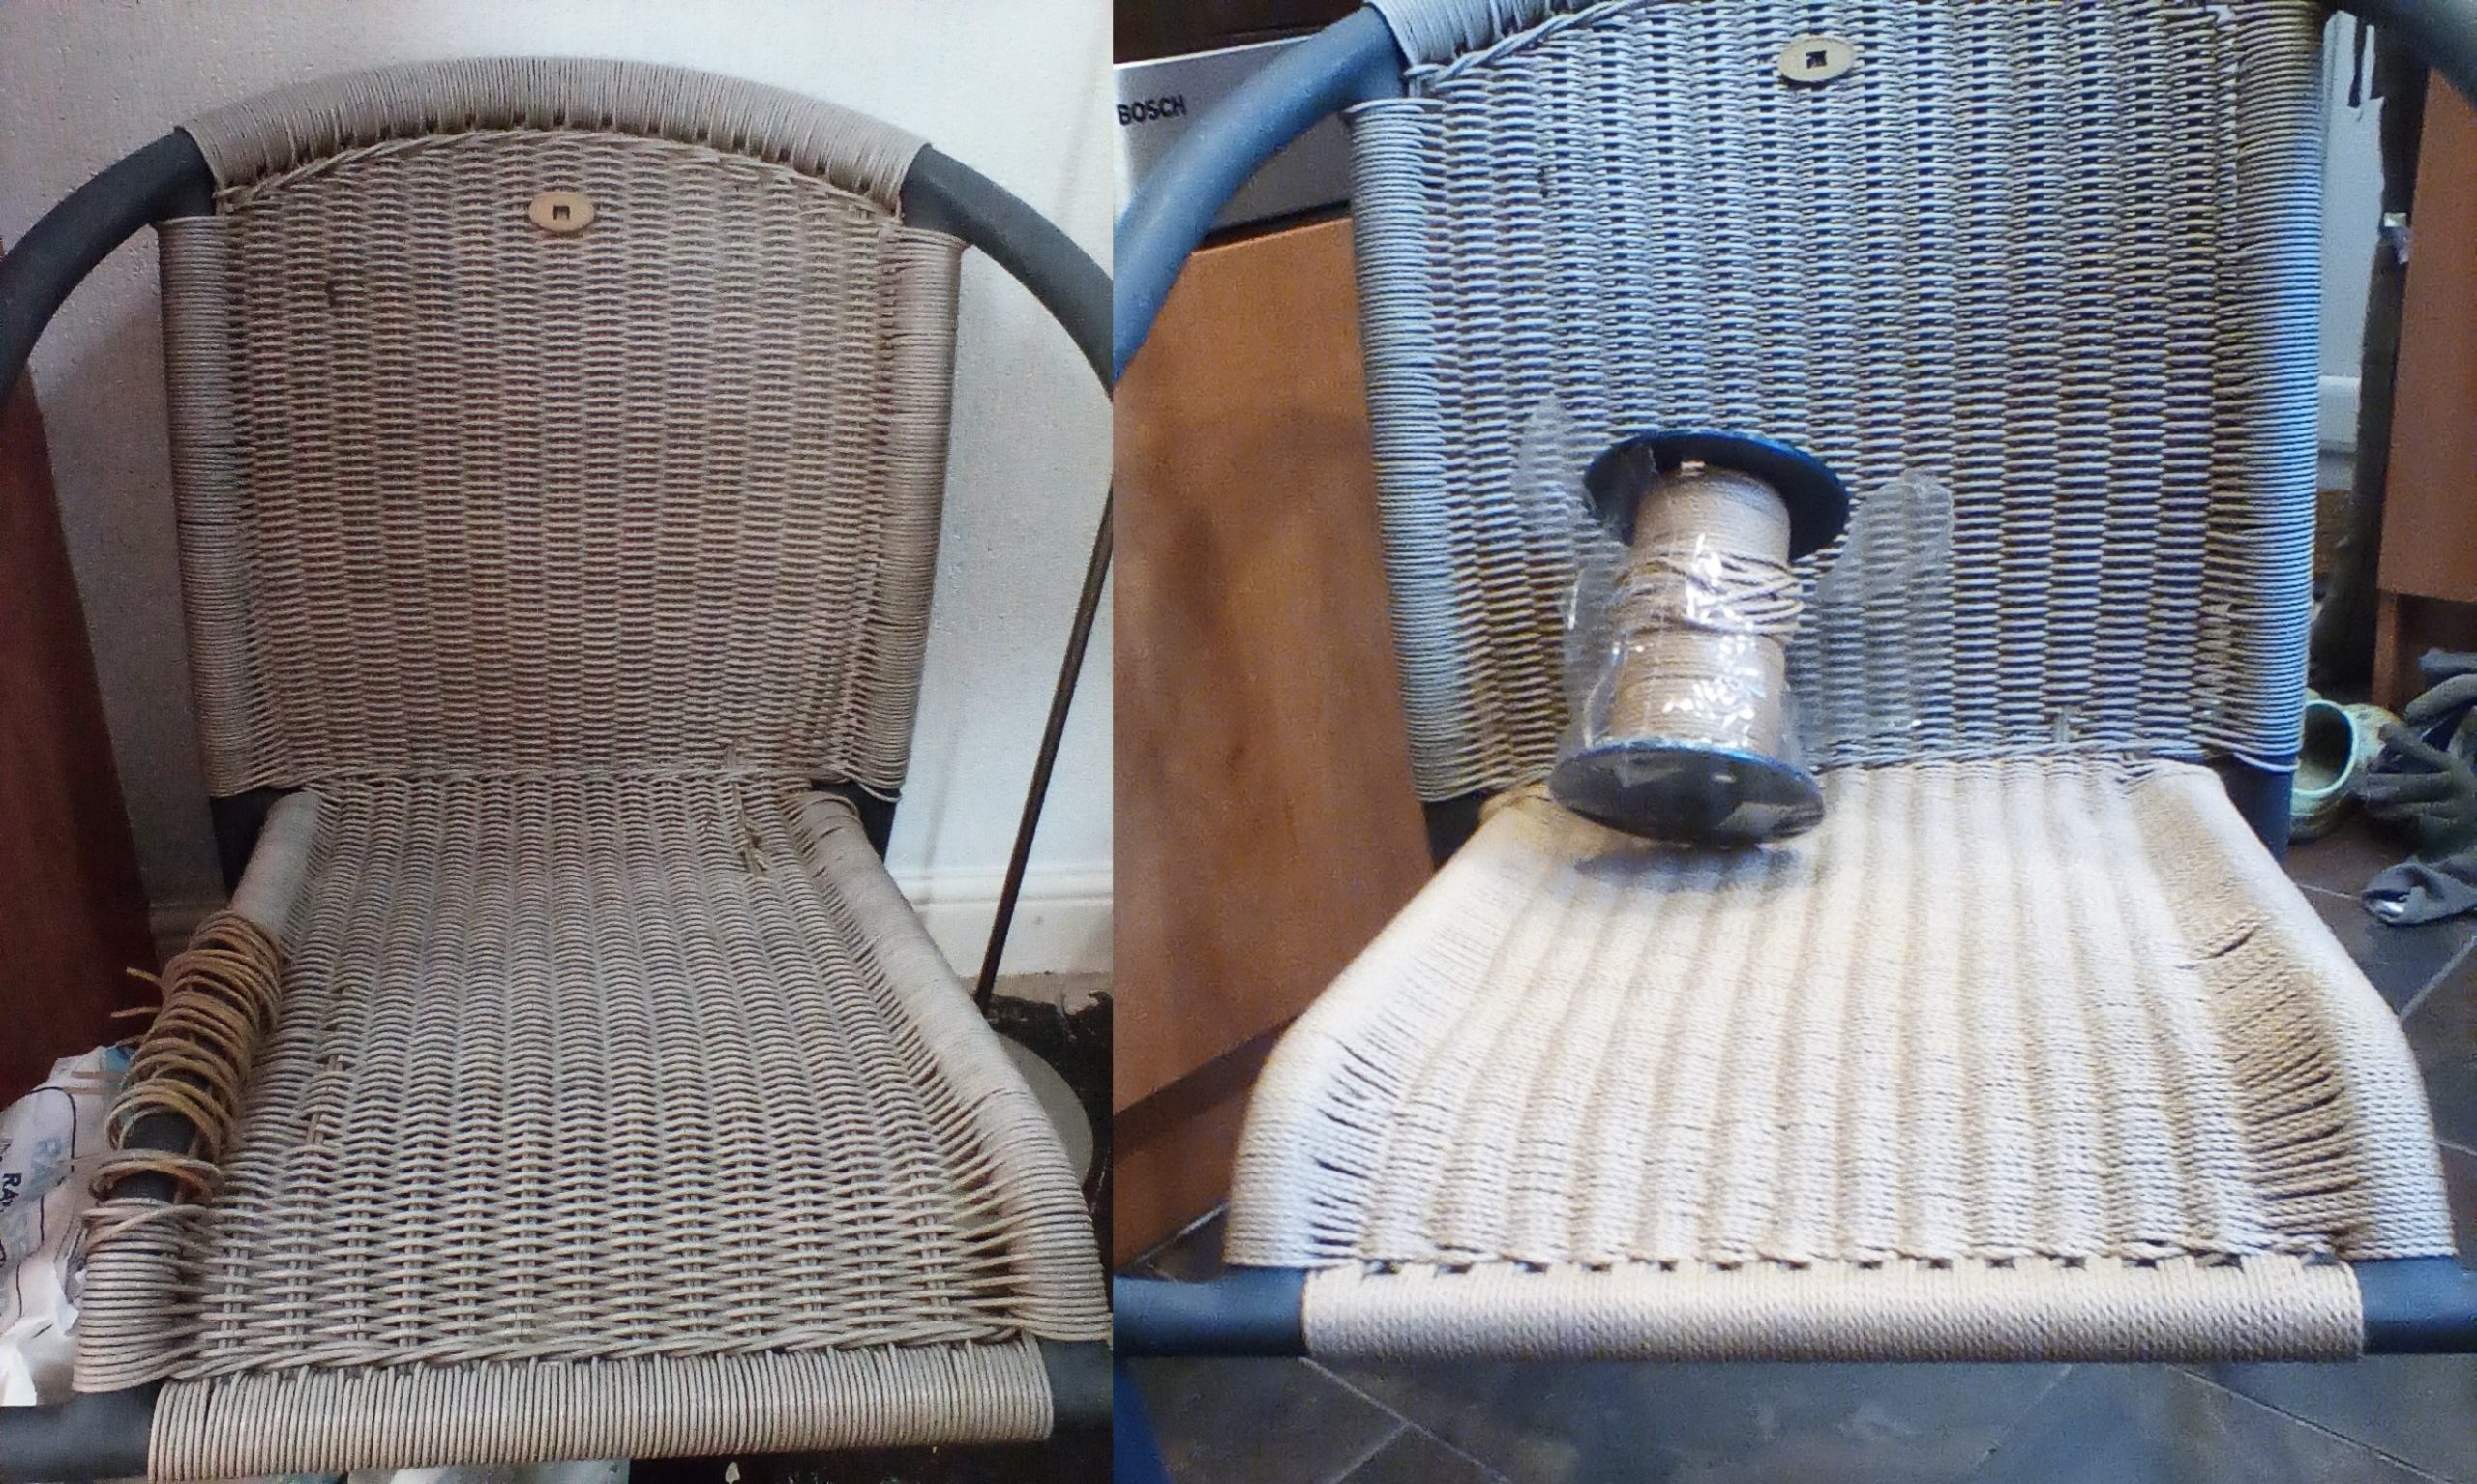 a chair seat before and after being mended